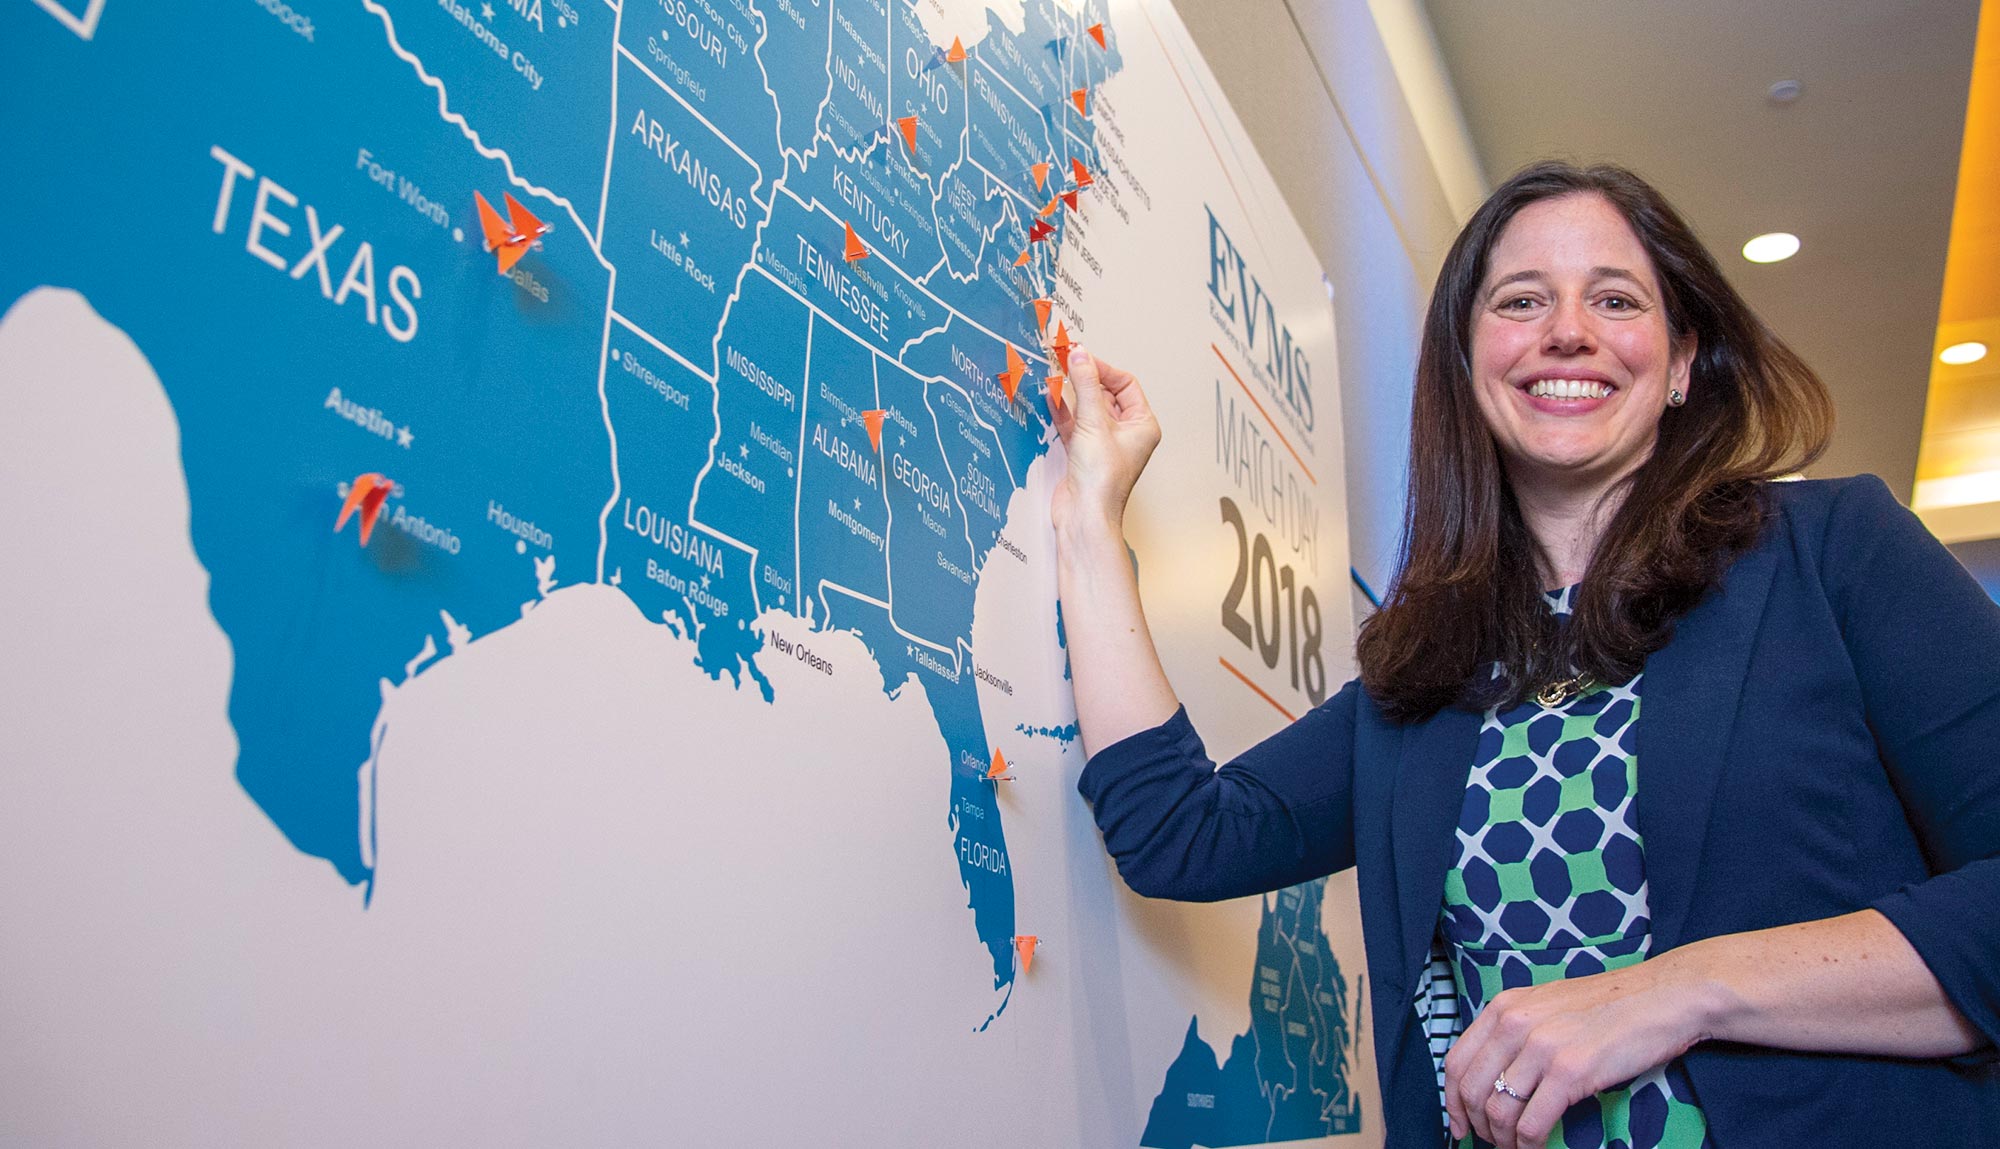 An MD student places her marker on a map for Match Day.